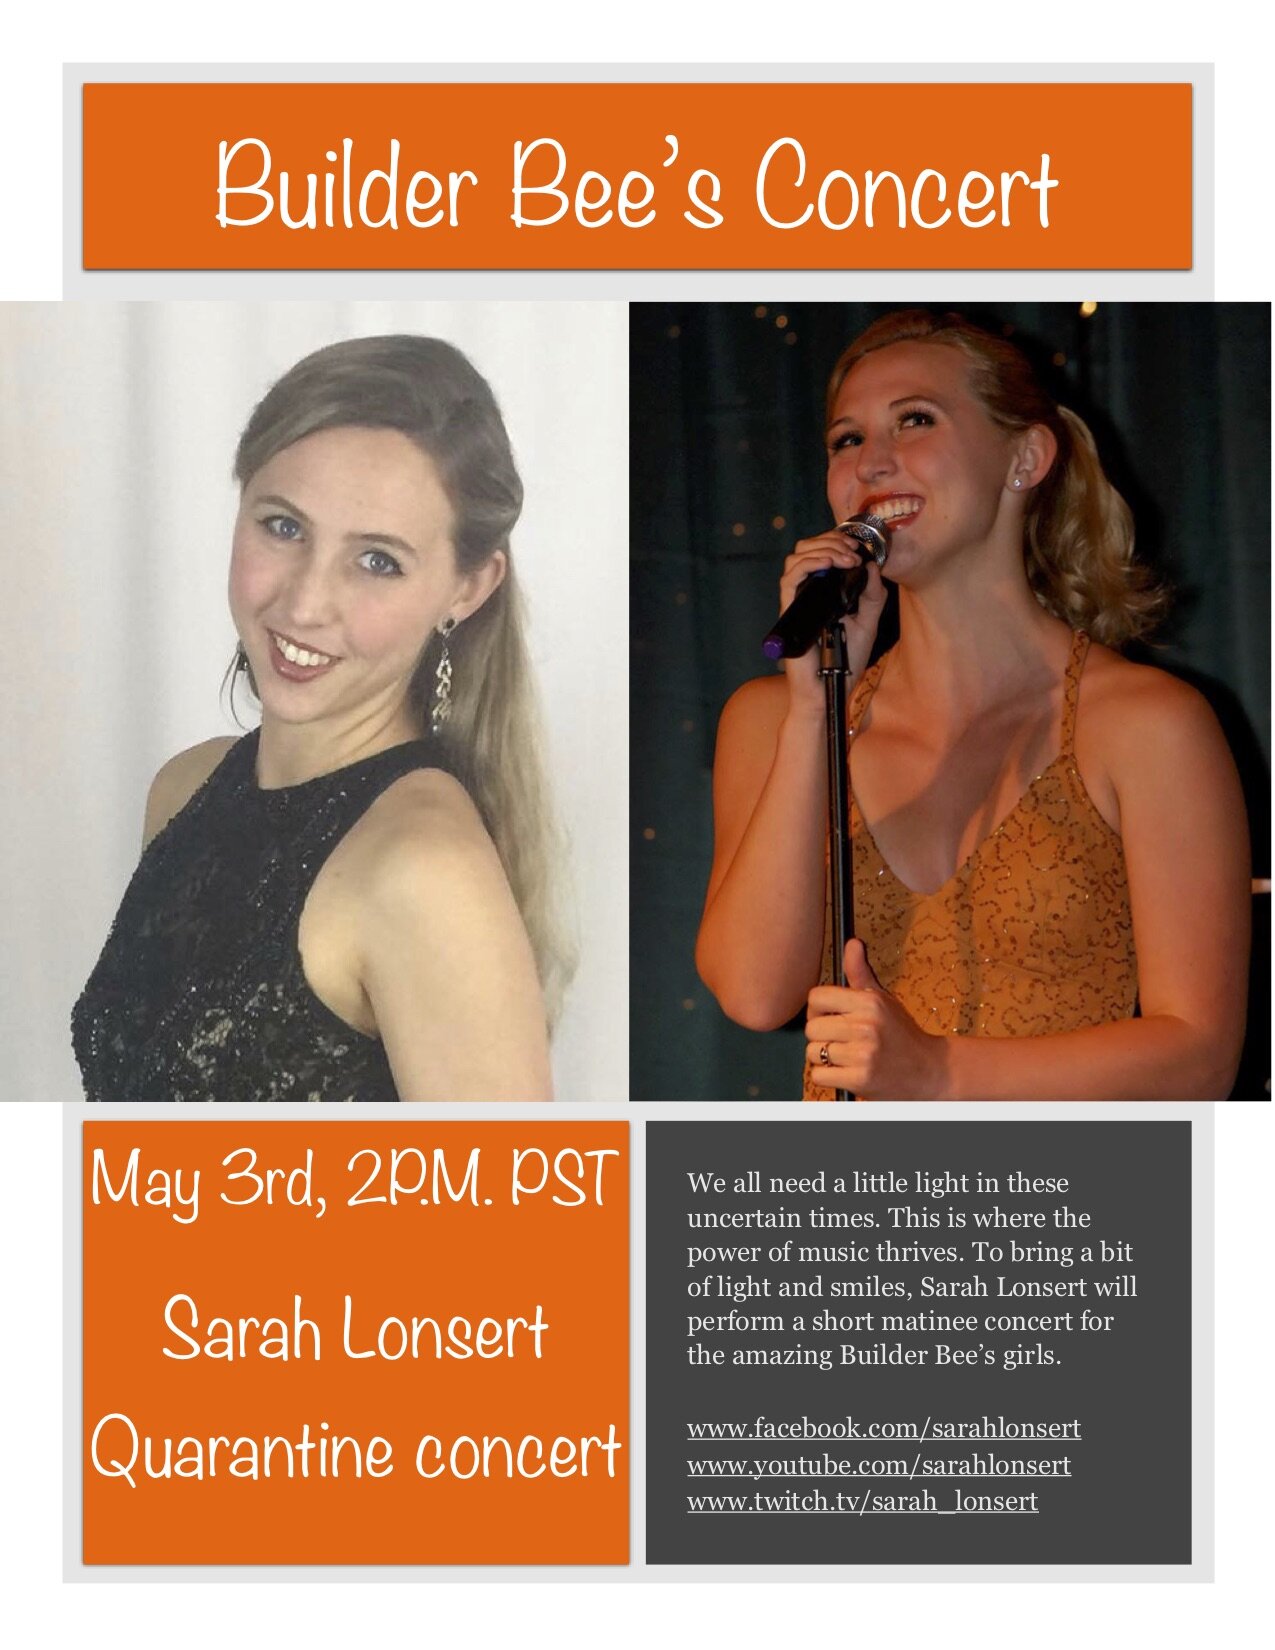 Builder Bees Concert with Sarah Lonsert